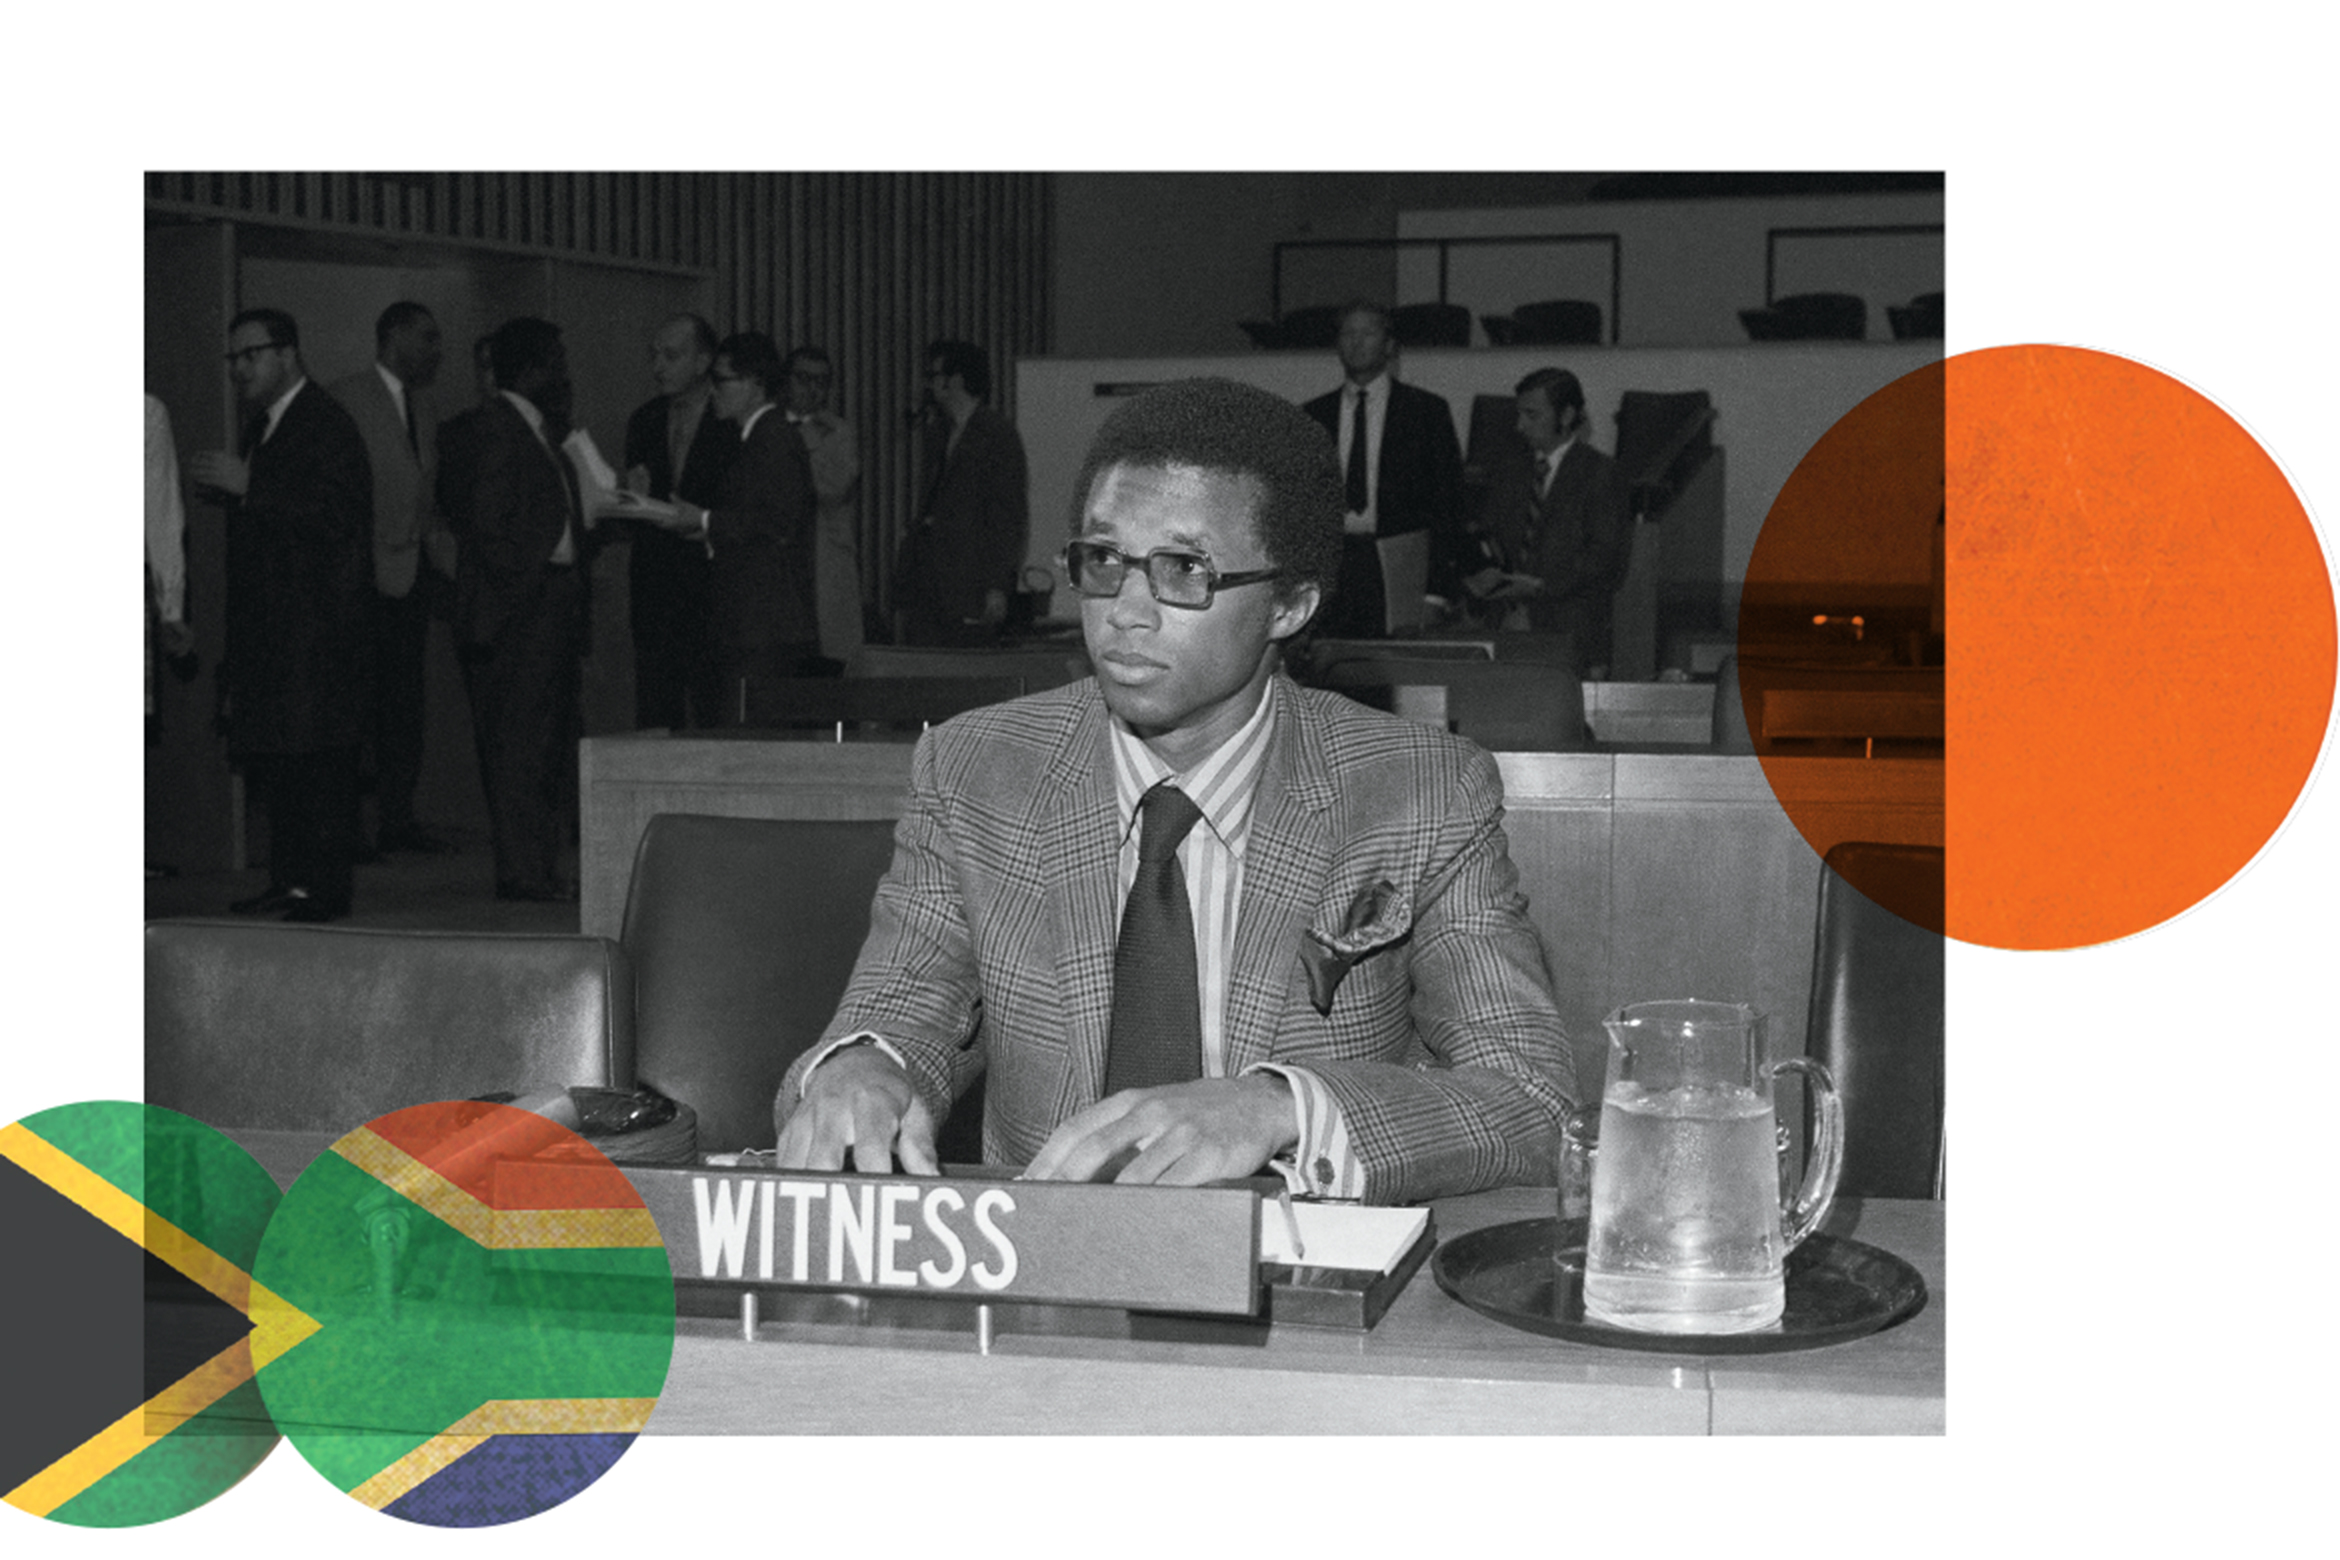 Image of Arthur Ashe at hearings of the United Nations General Assembly’s Special Committee on Apartheid in 1970.